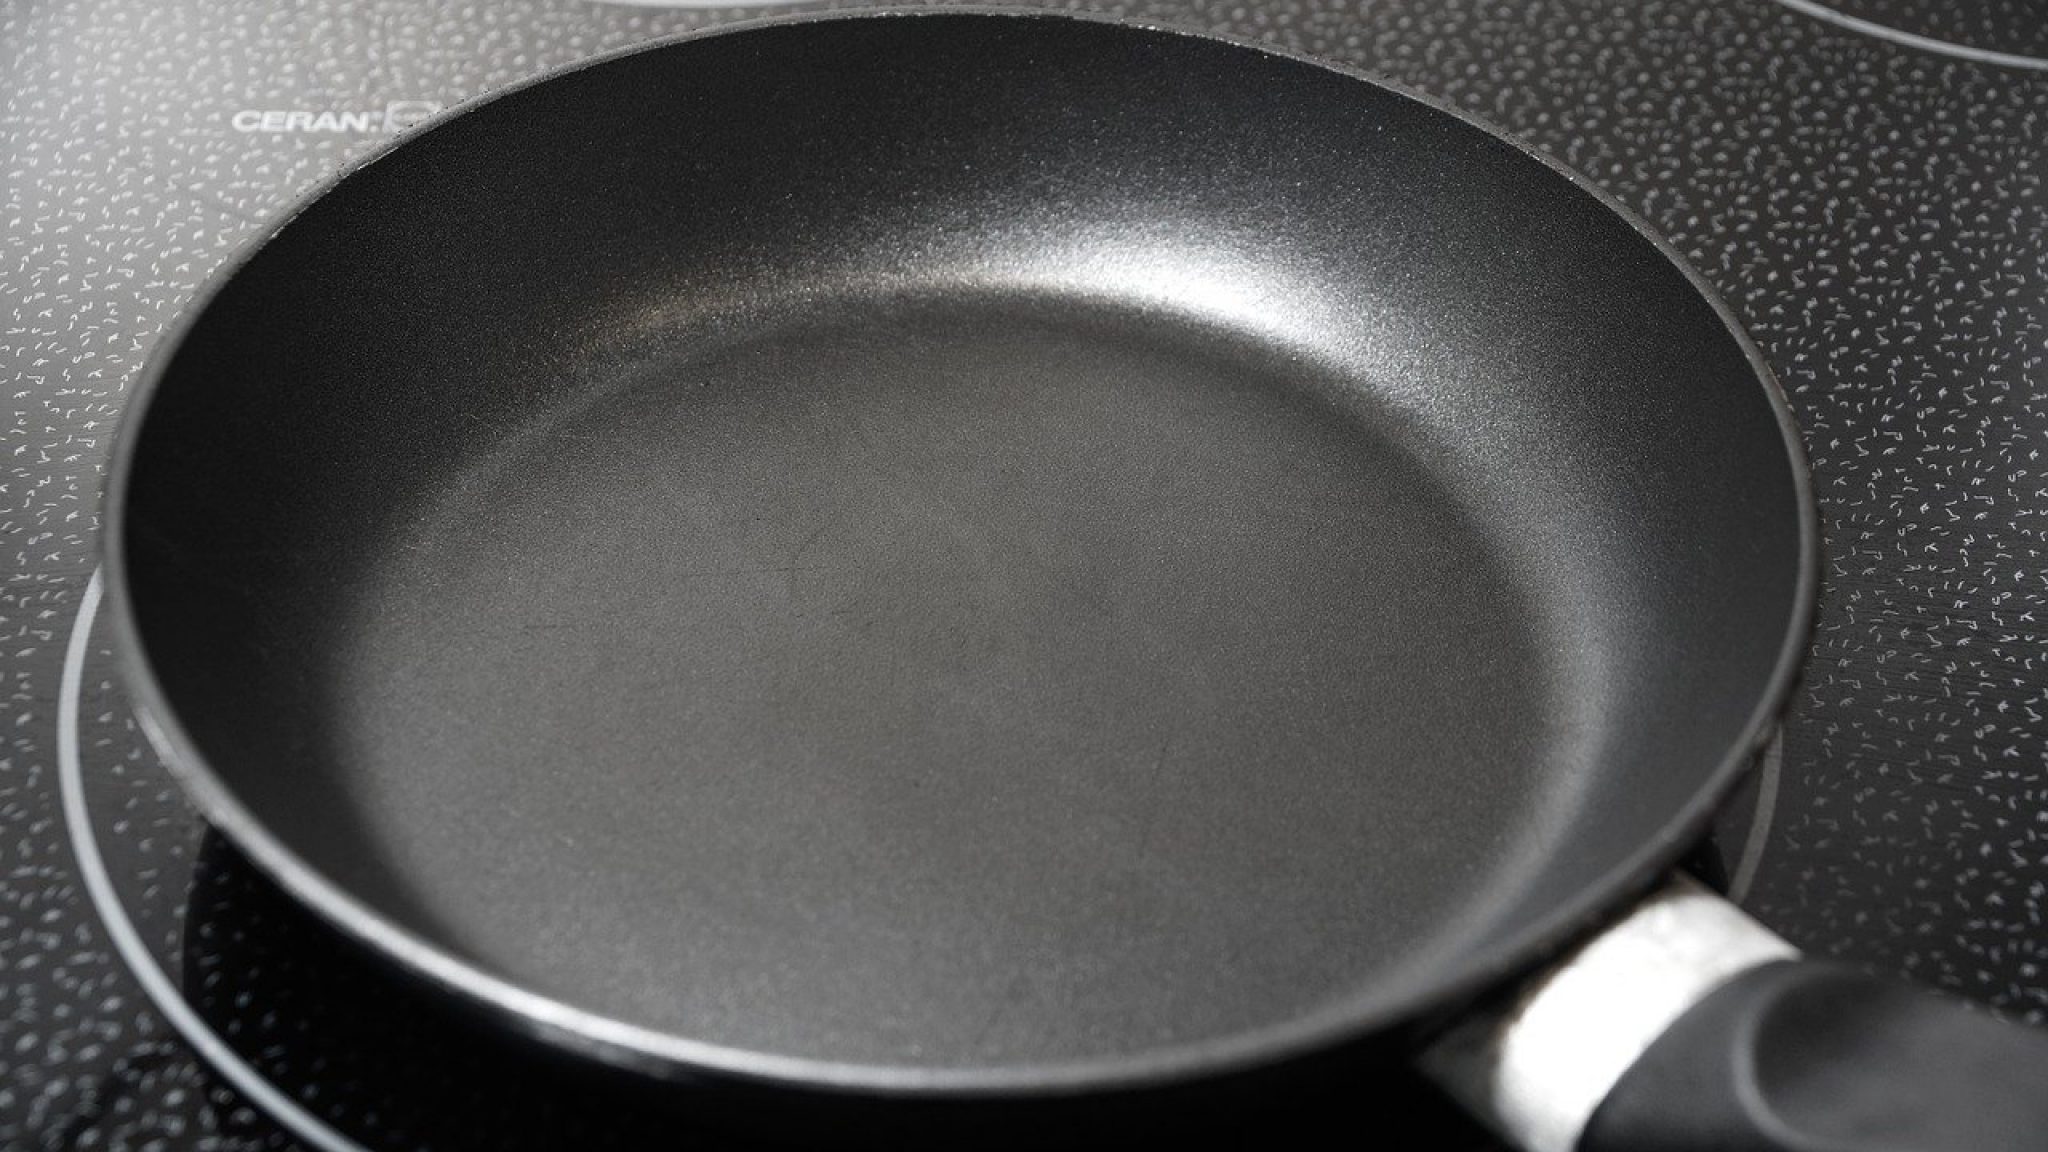 How to get burnt food out of a non-stick pan